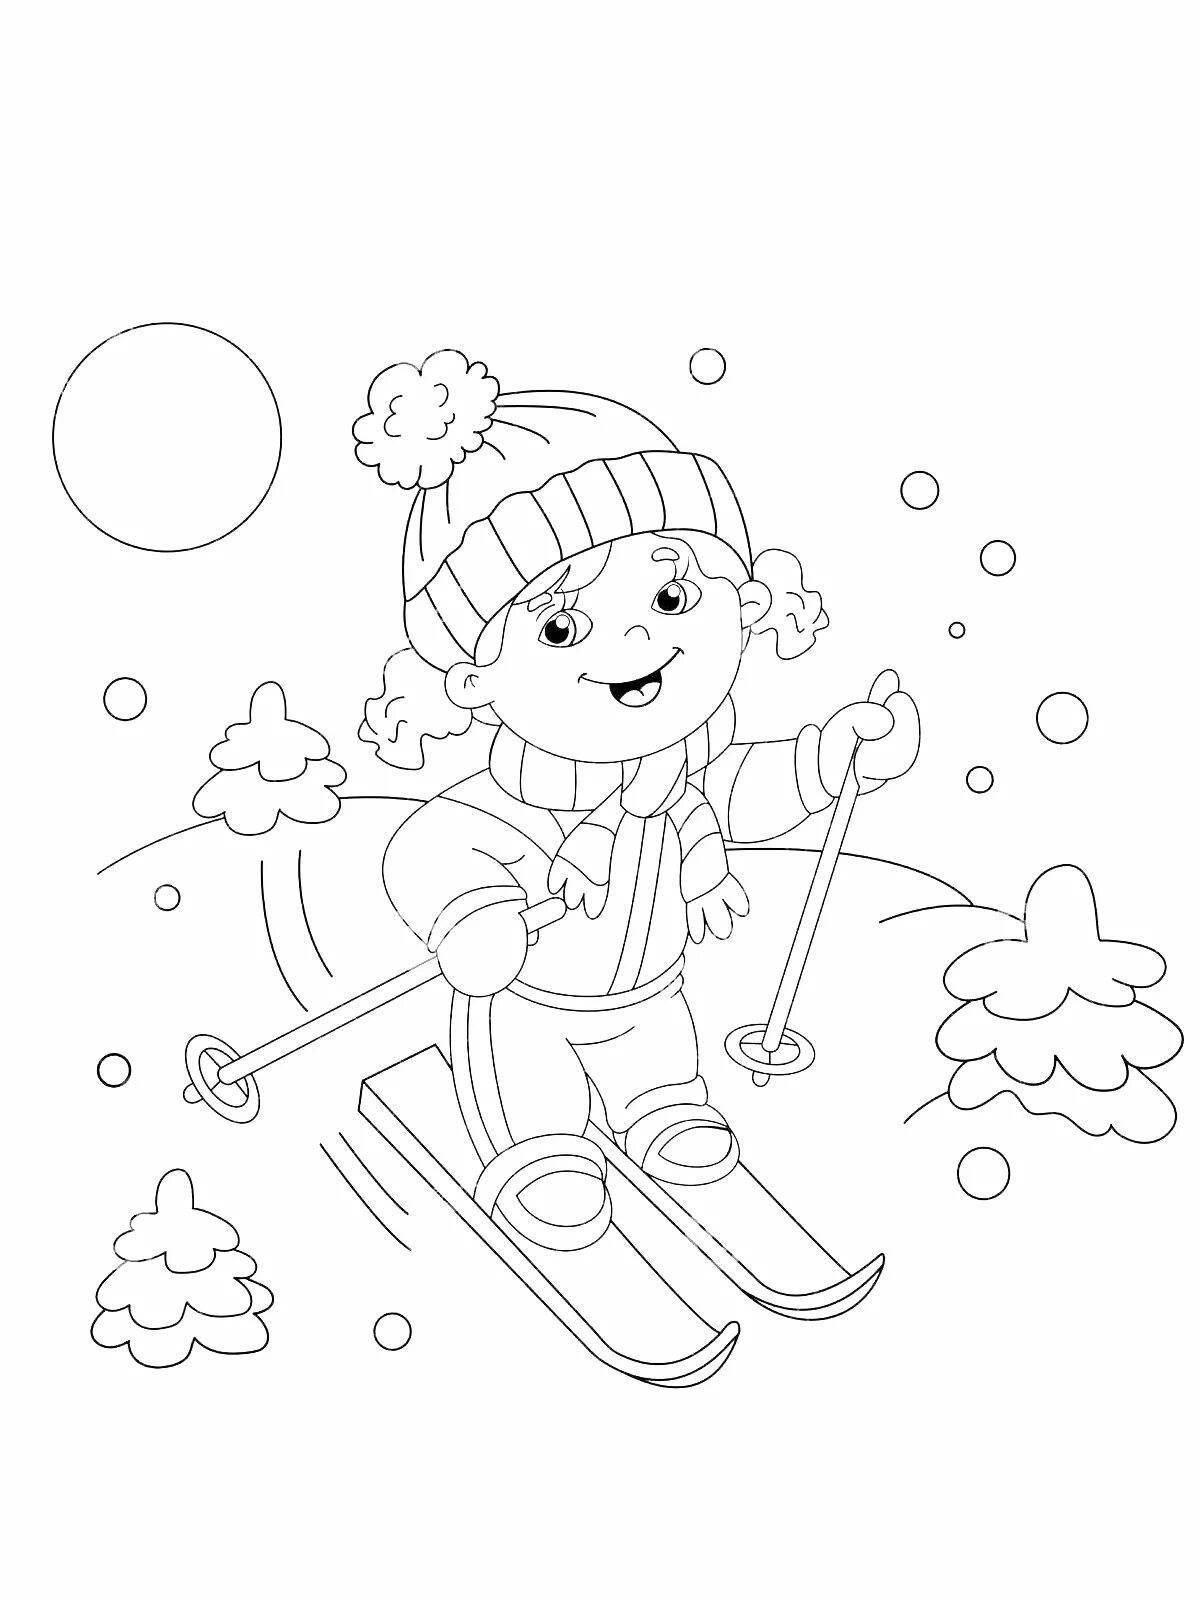 Amazing sports coloring pages for preschoolers